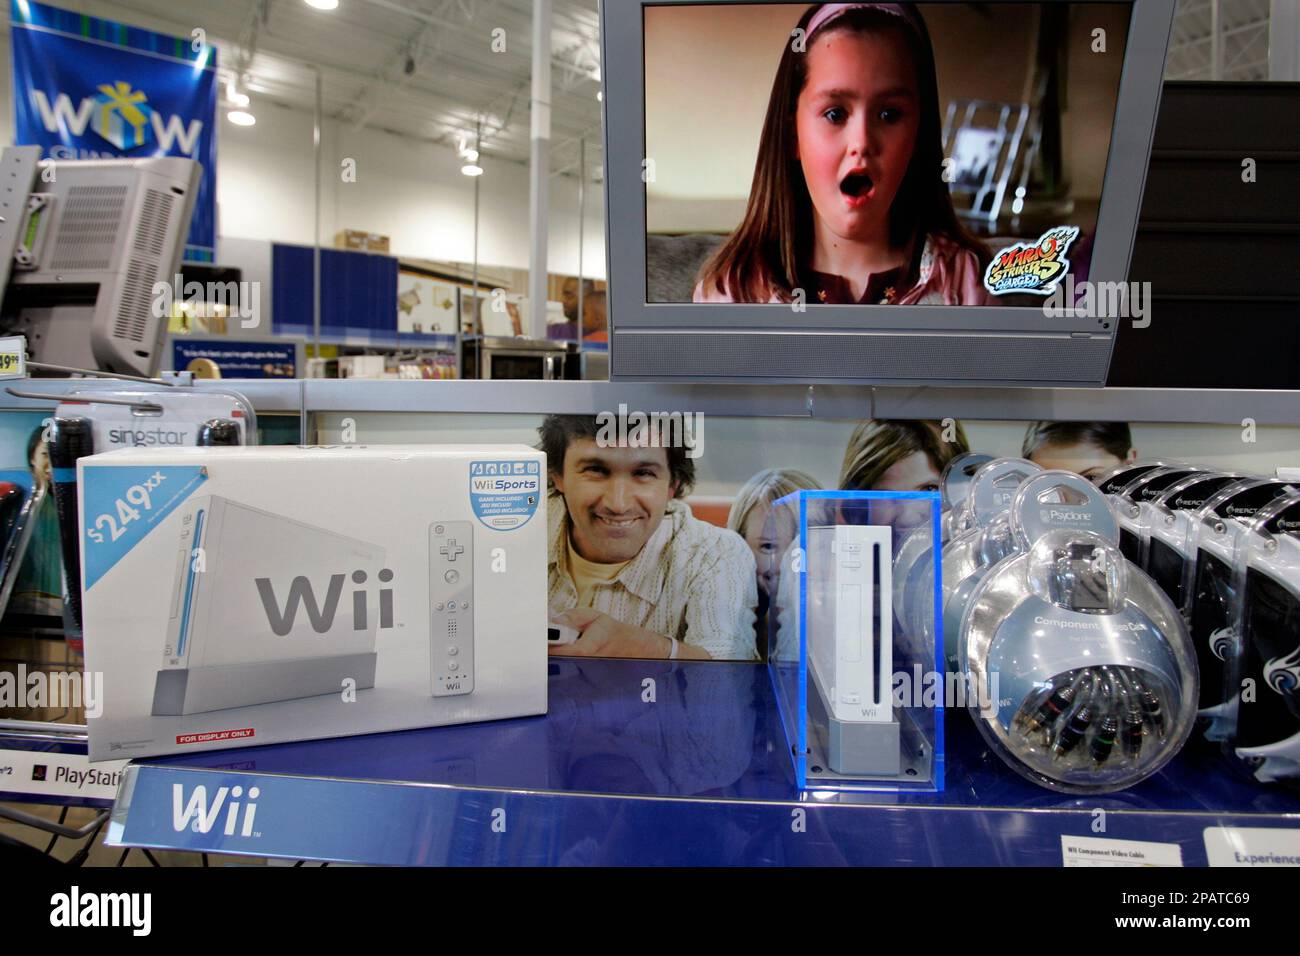 A Nintendo Wii game console and accessories are seen on display at Best Buy  in Mountain View, Calif., Tuesday, Nov. 20, 2007. This year, it looks like  the gift everybody is looking